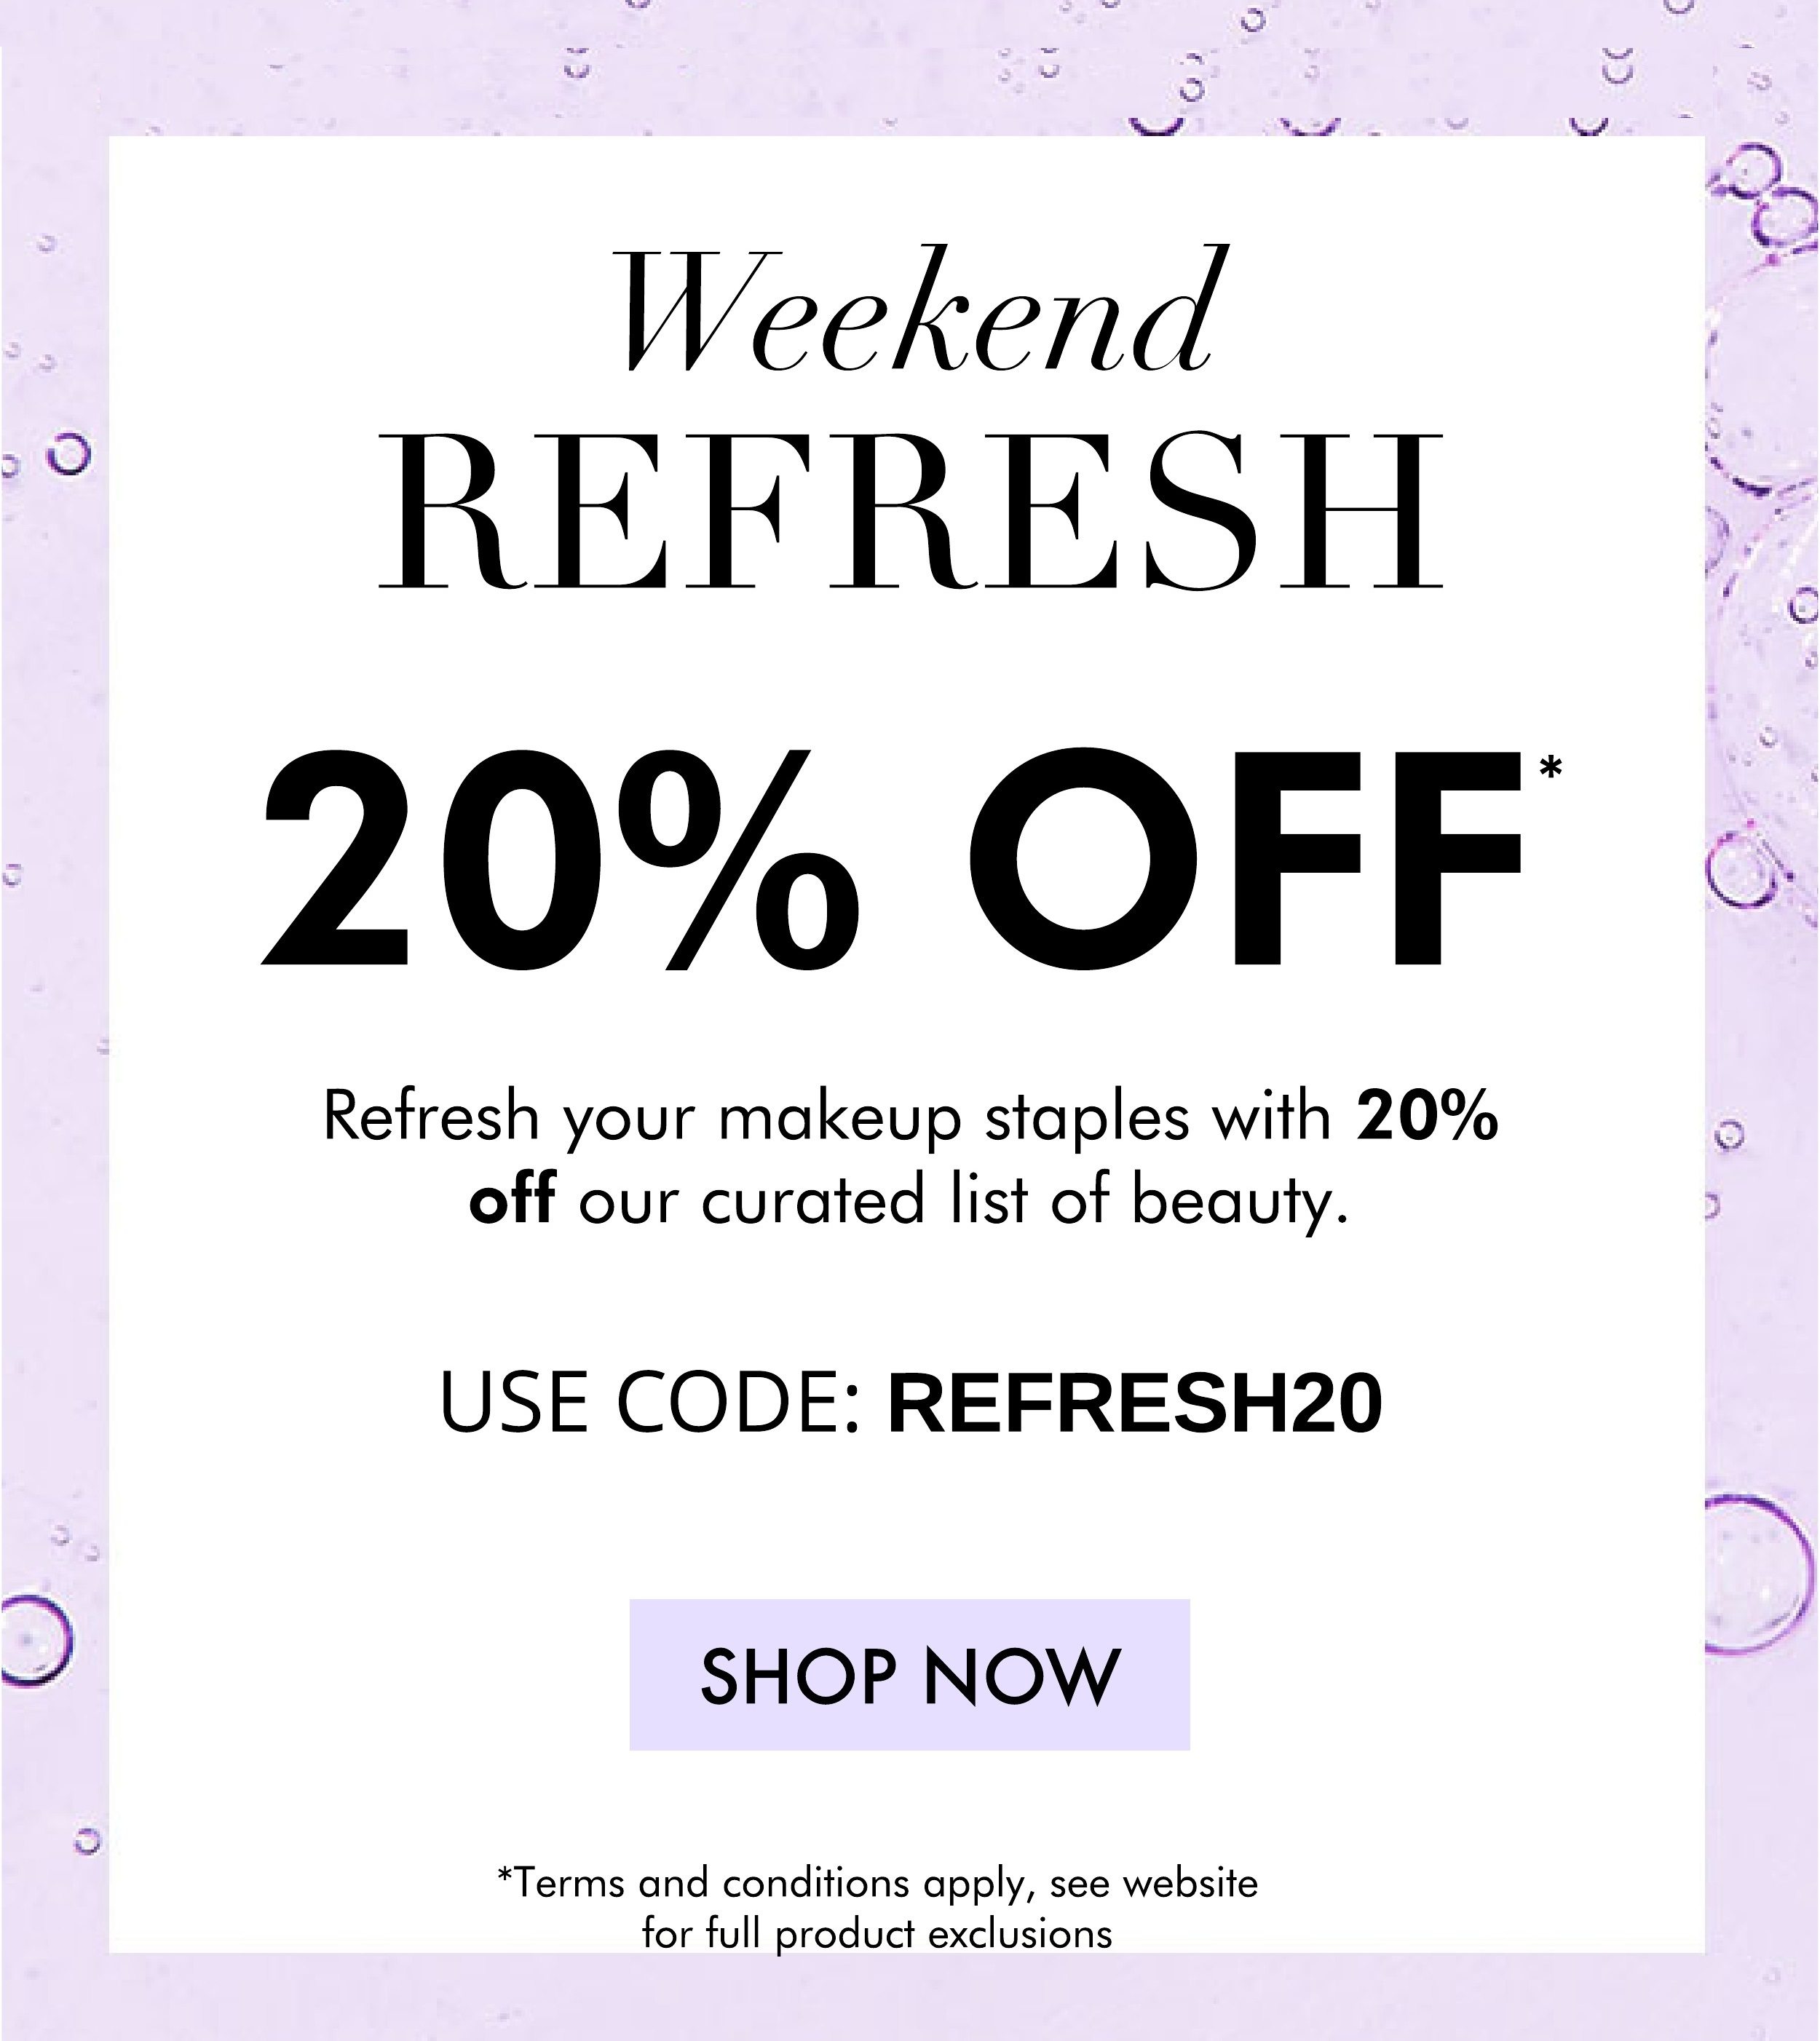 20 PERCENT OFF WEEKEND REFRESH MUST HAVES